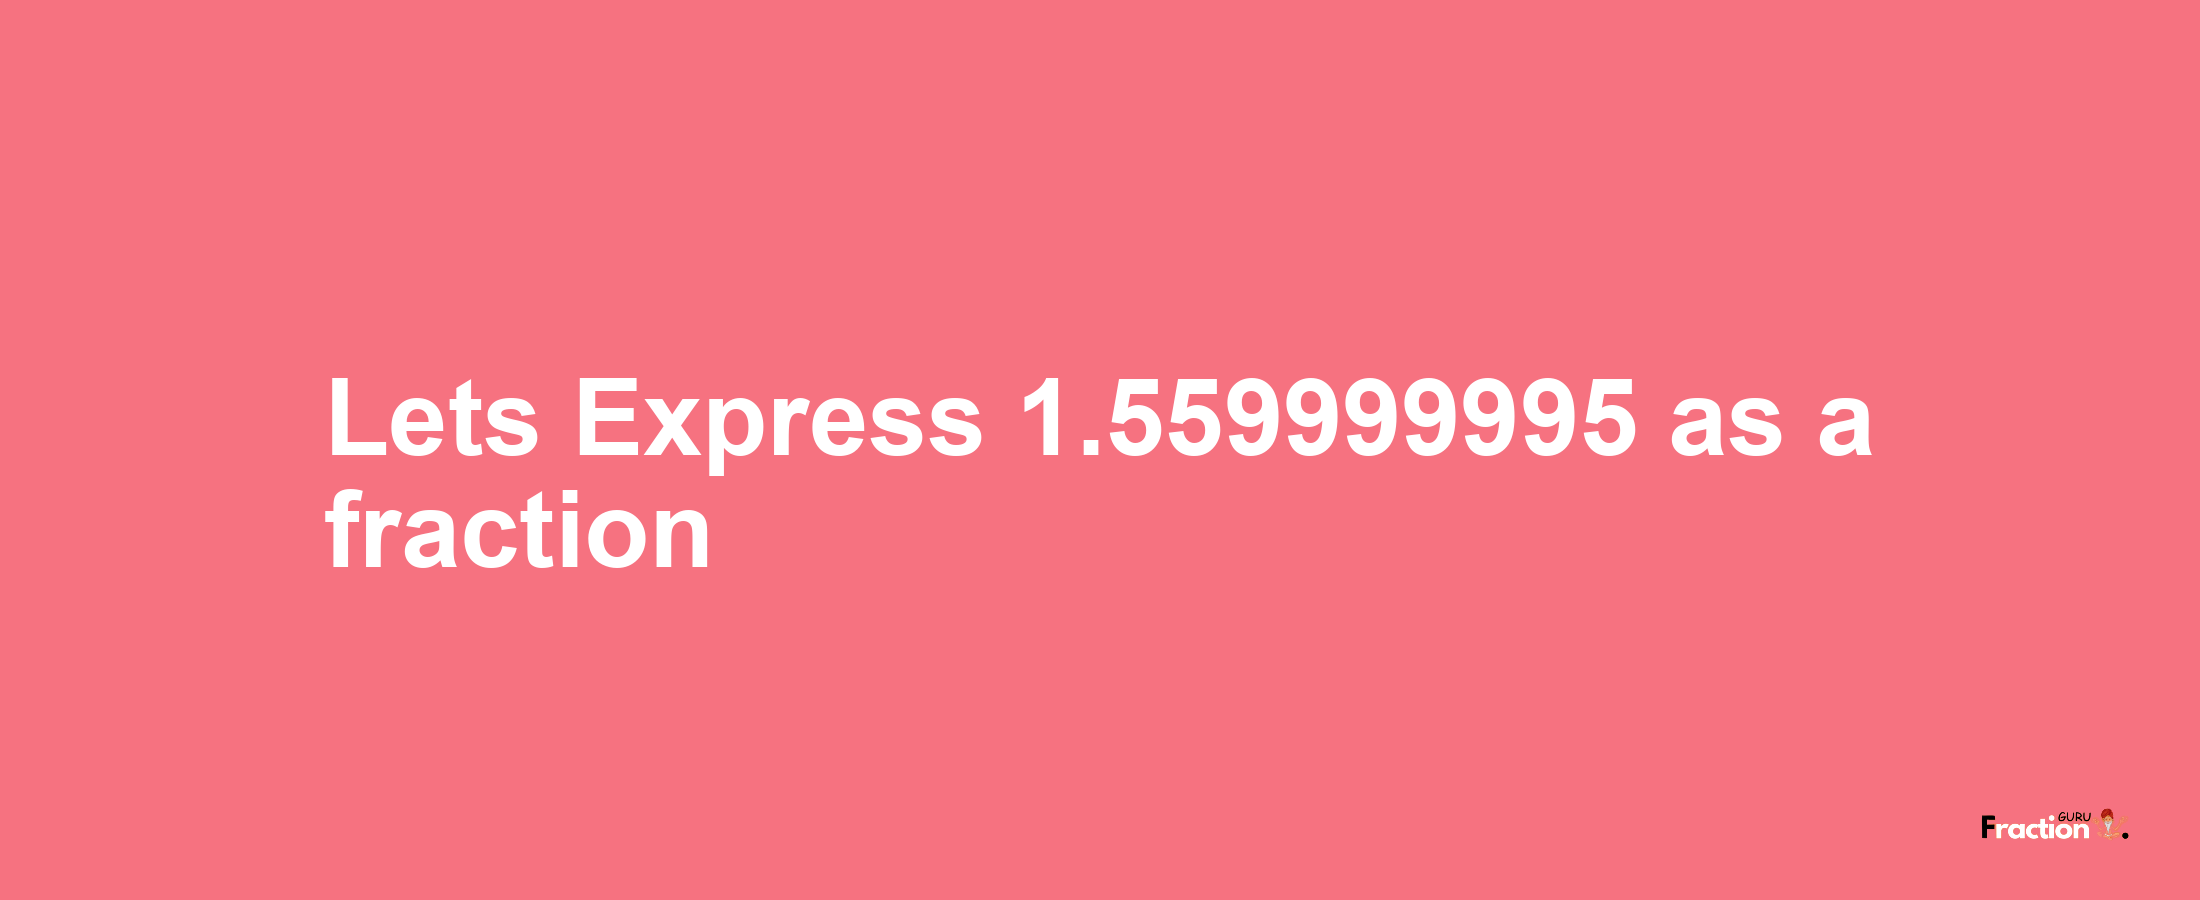 Lets Express 1.559999995 as afraction